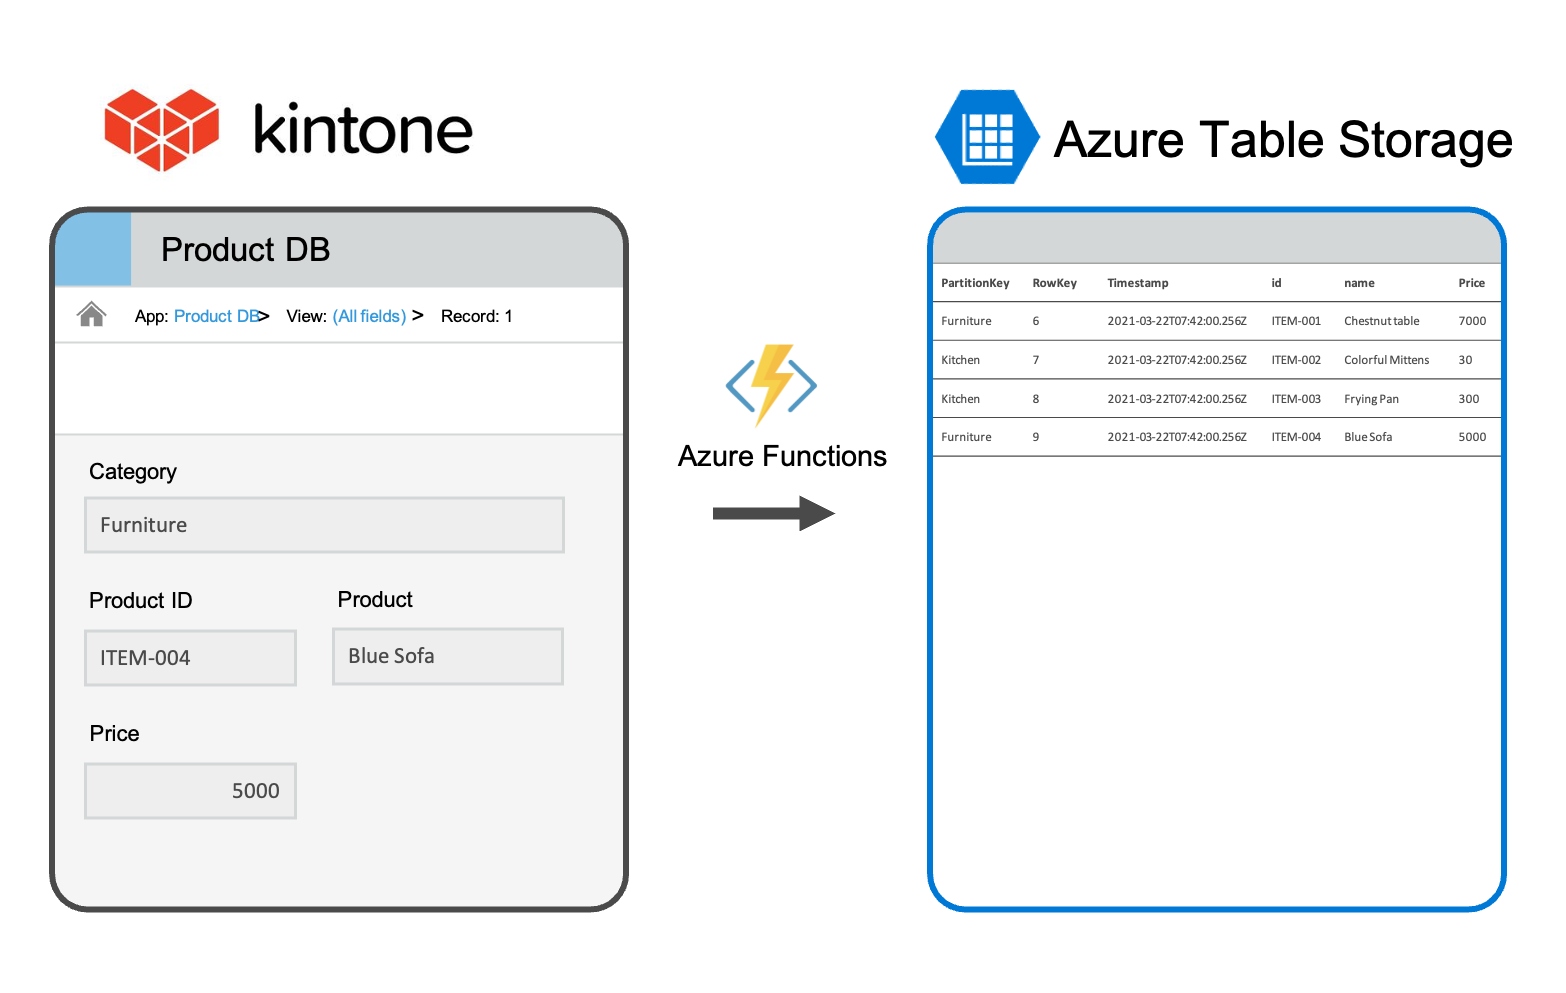 IMAGE: Data from Kintone Backed up with Azure